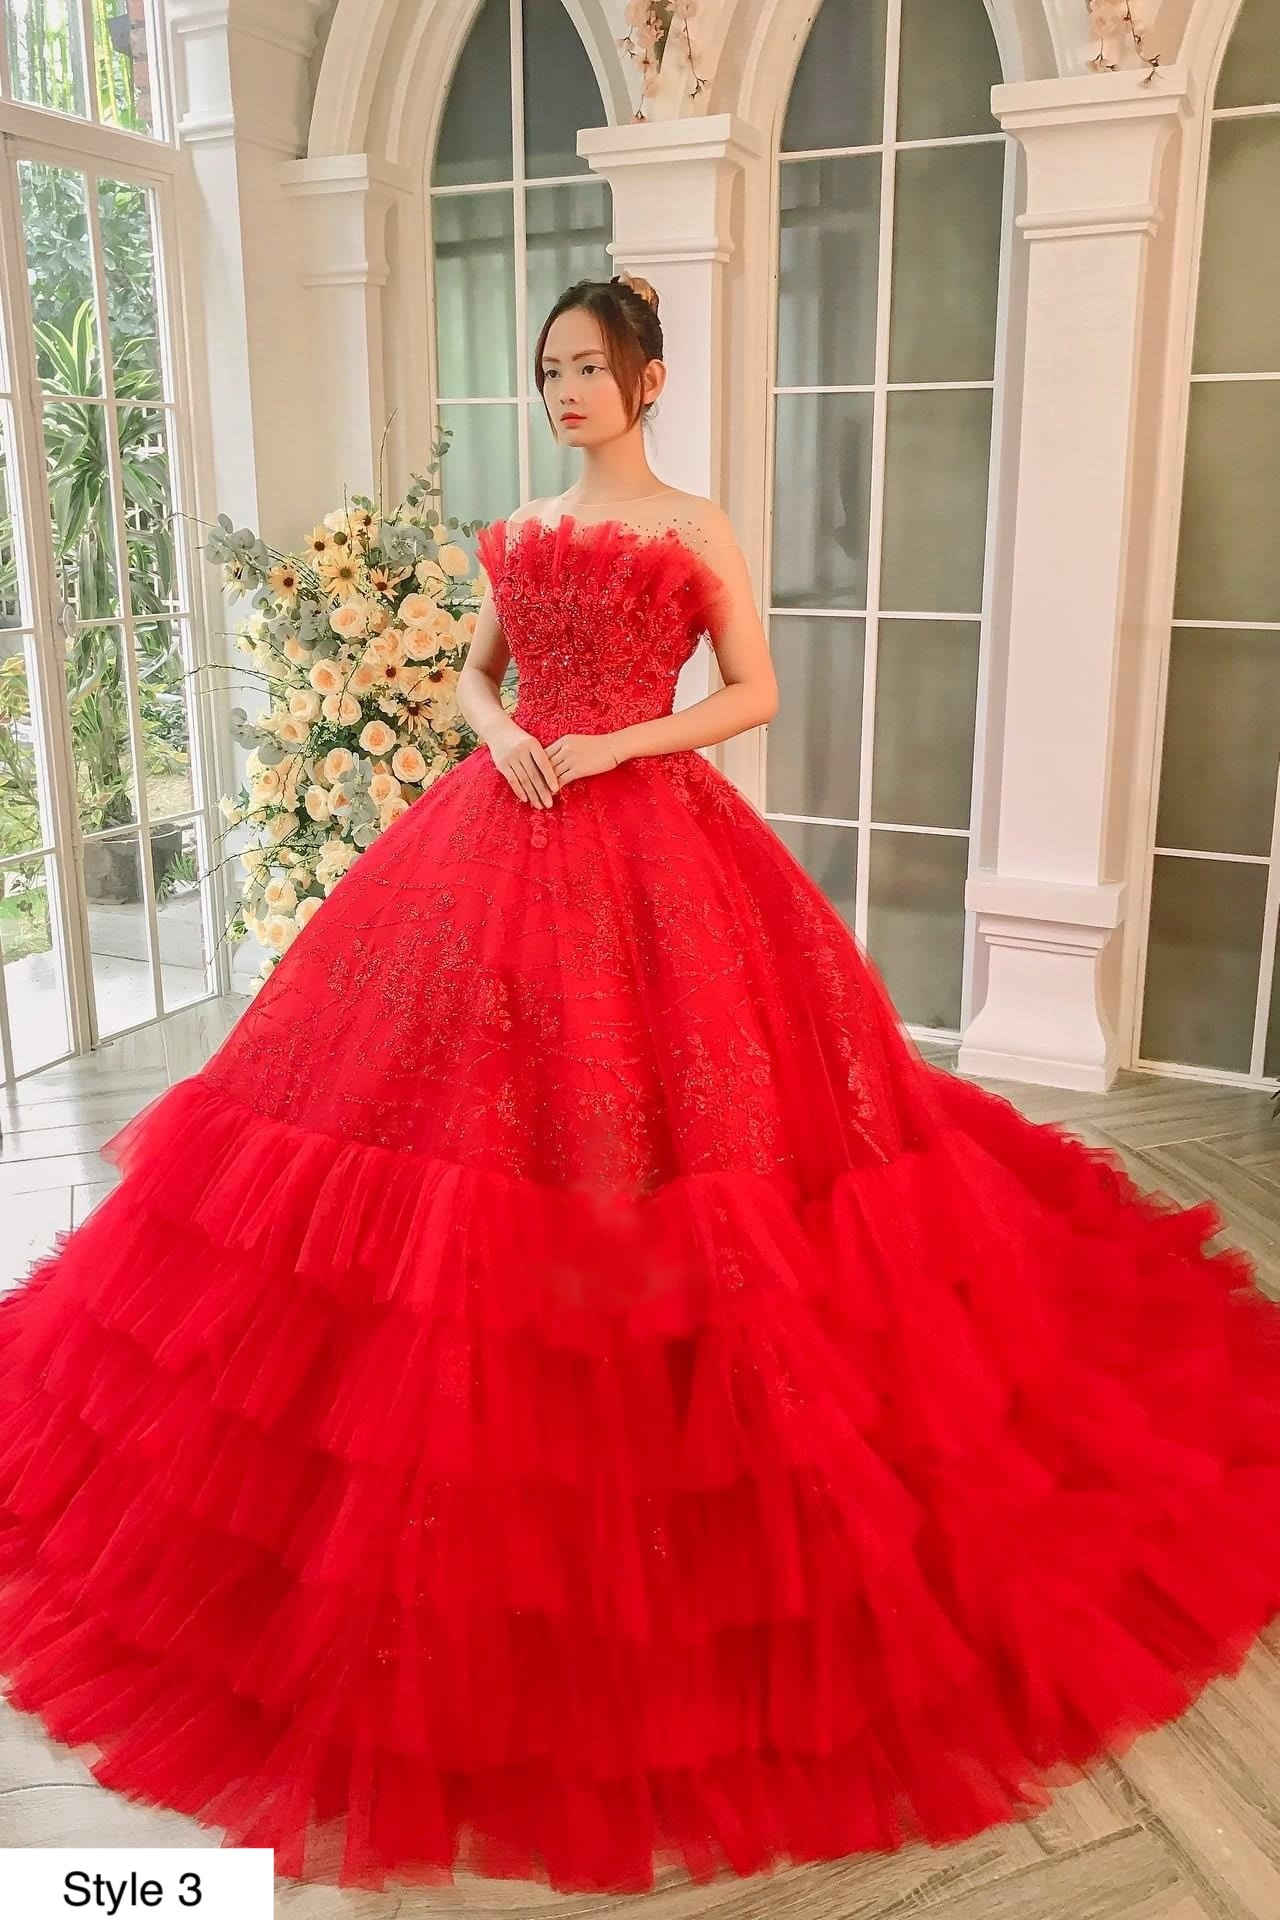 Red Off Shoulder Ball Gown Princess Gothic Red Wedding Dress With Lace Up  Back And Floor Length Hemline 2019 Collection From Totallymodest, $96.52 |  DHgate.Com